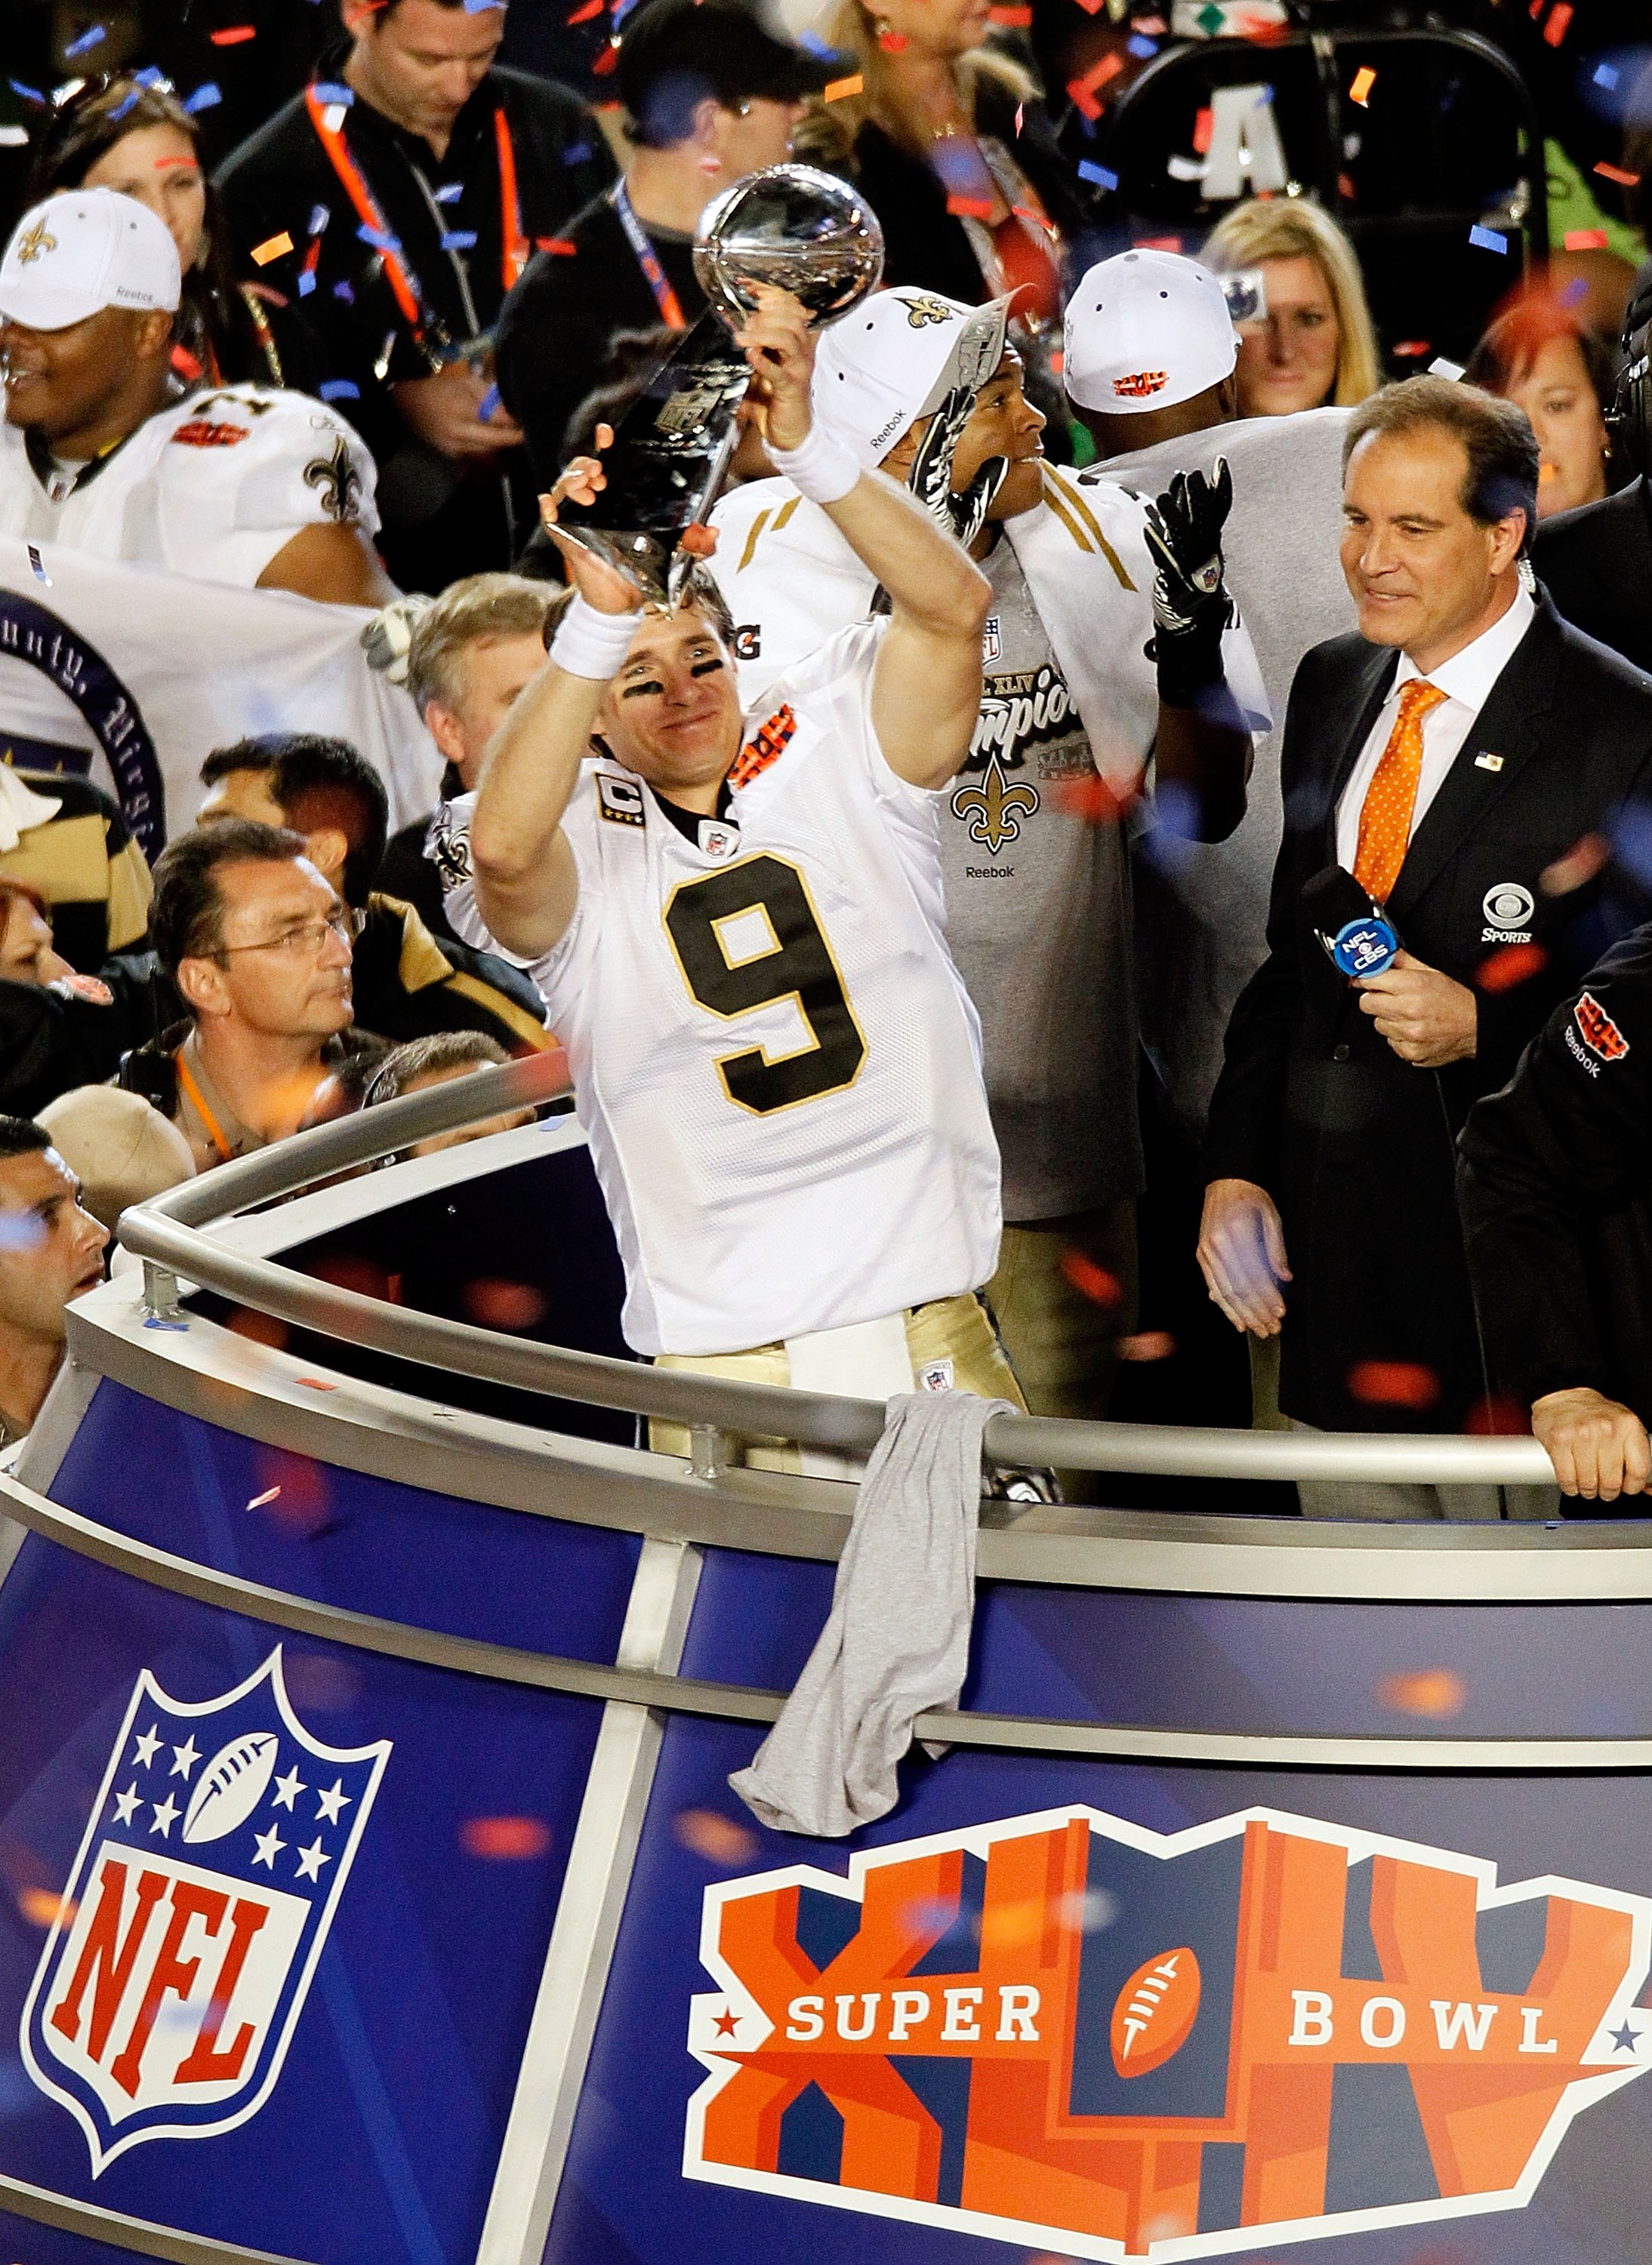 Three-Peat: Can Drew Brees Lead the NFL in Passing Touchdowns Yet